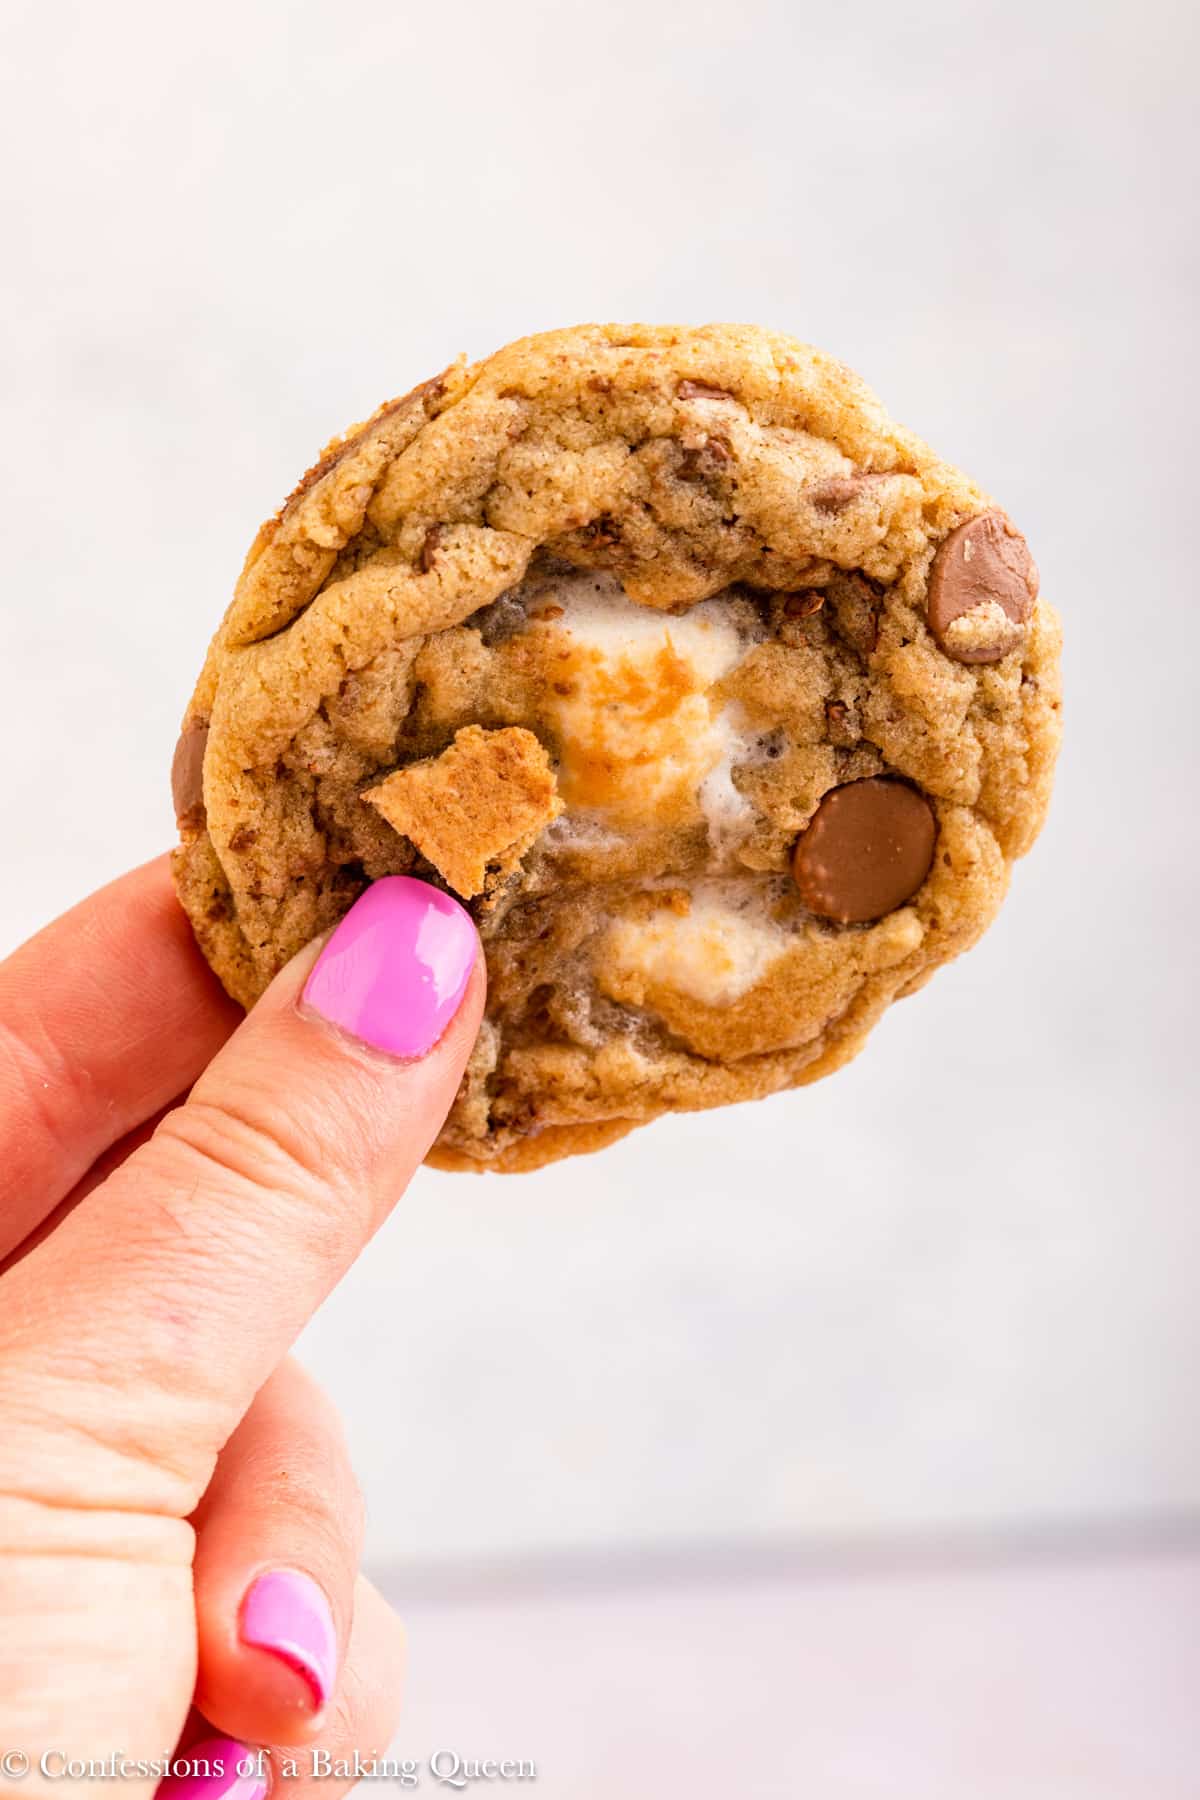 A hand holding a s'mores cookie.